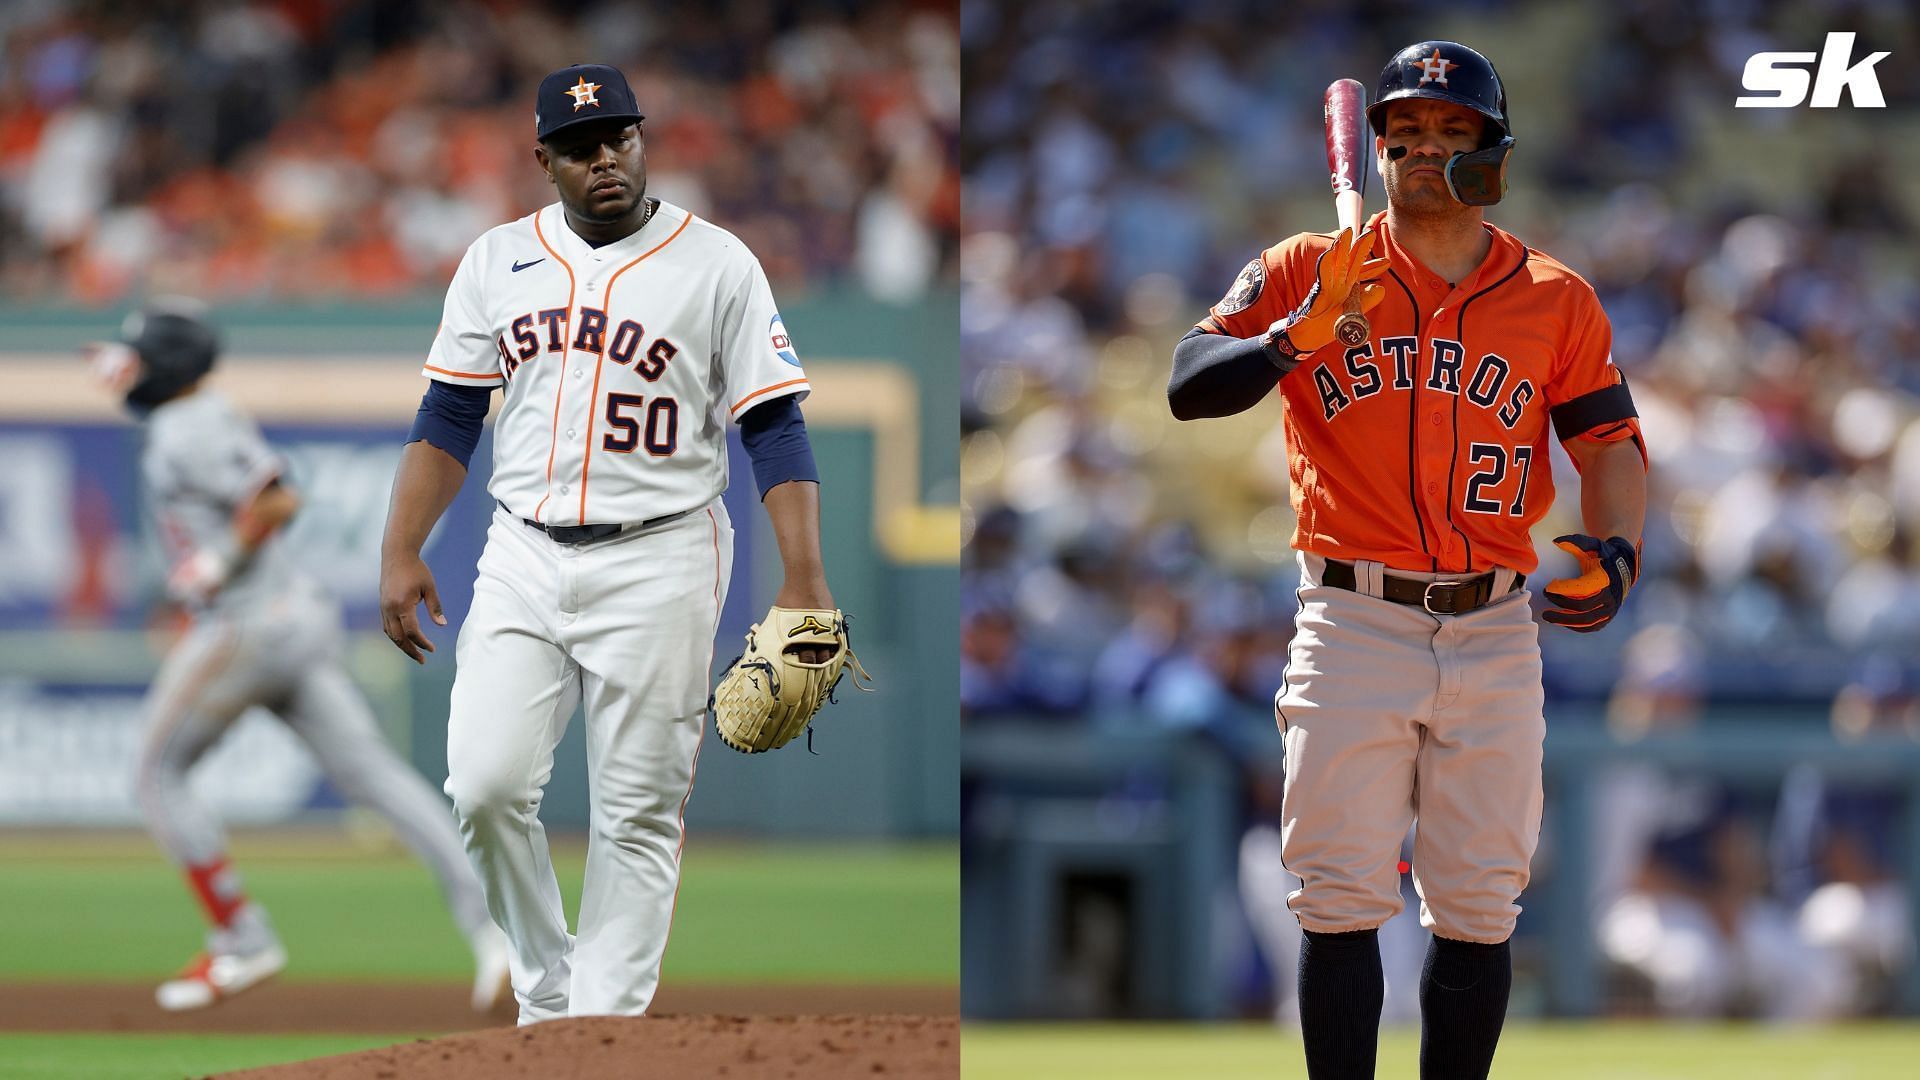 After a morbid start, the postseason is looking increasingly unlikely for the Houston Astros